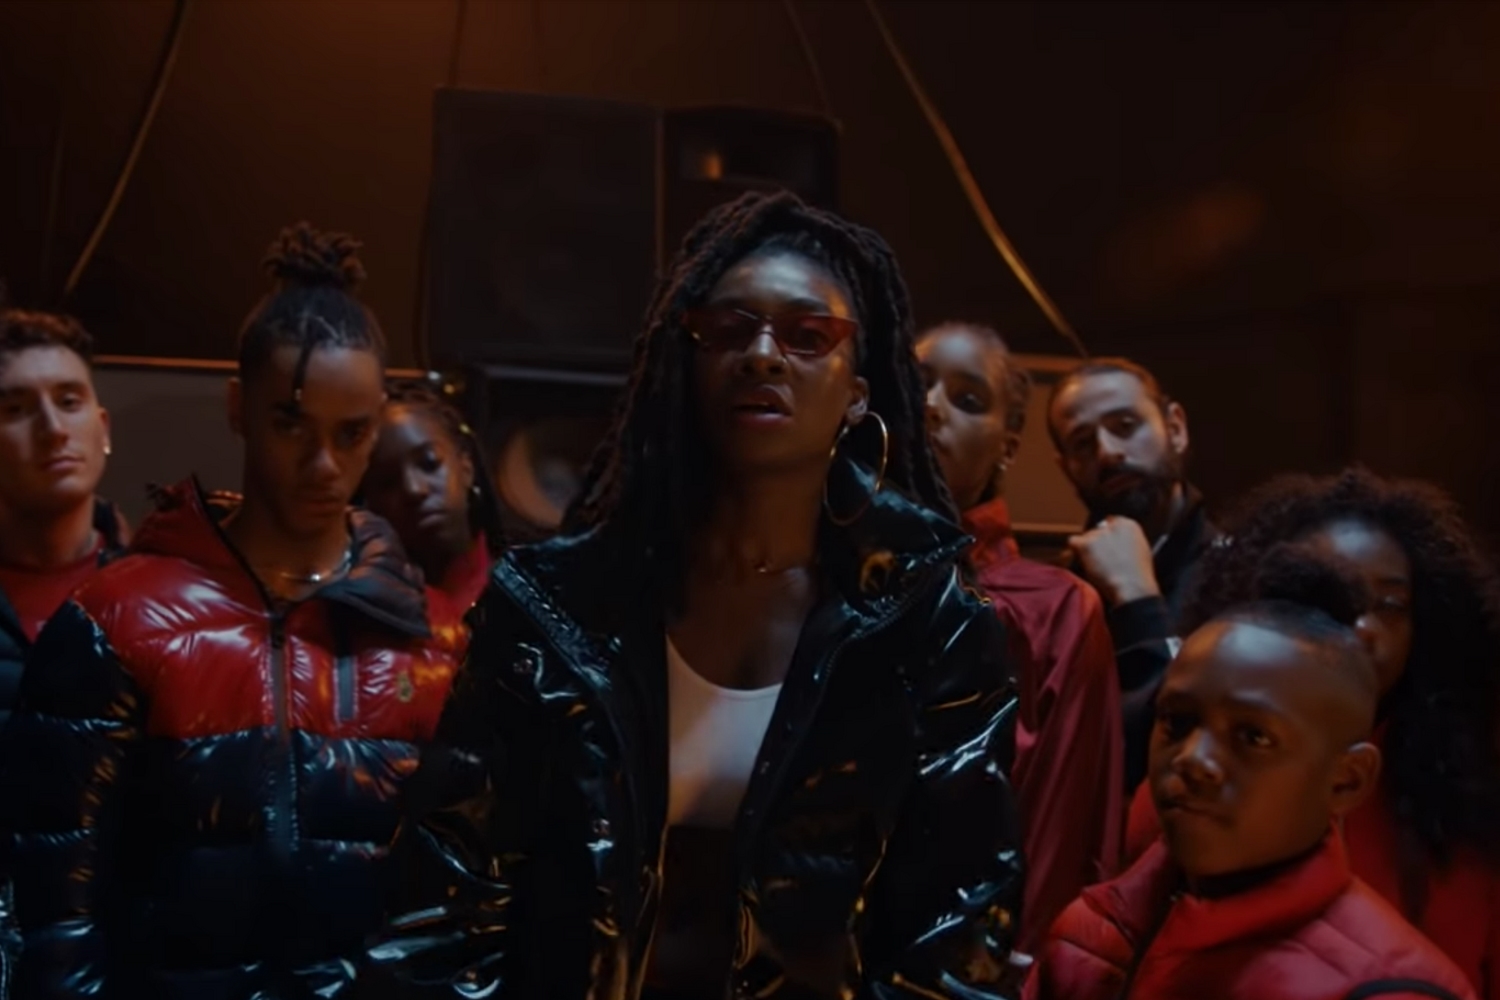 Little Simz stages a dance-off in energetic new video for ‘Offence’